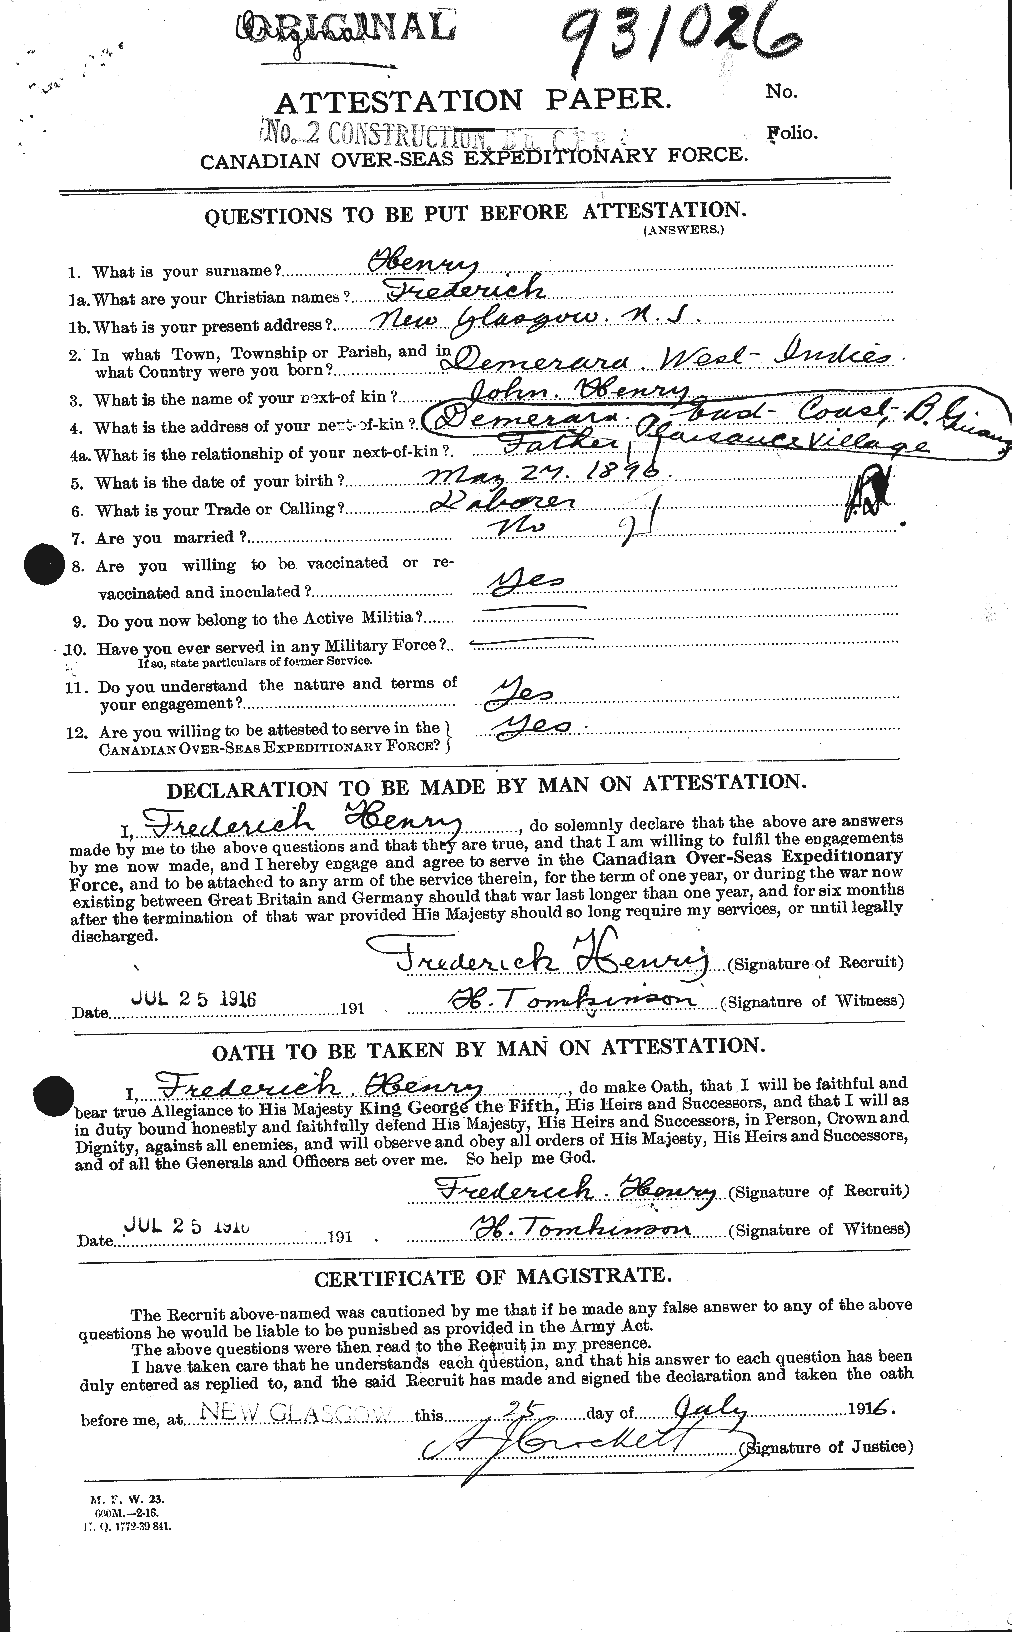 Personnel Records of the First World War - CEF 392858a